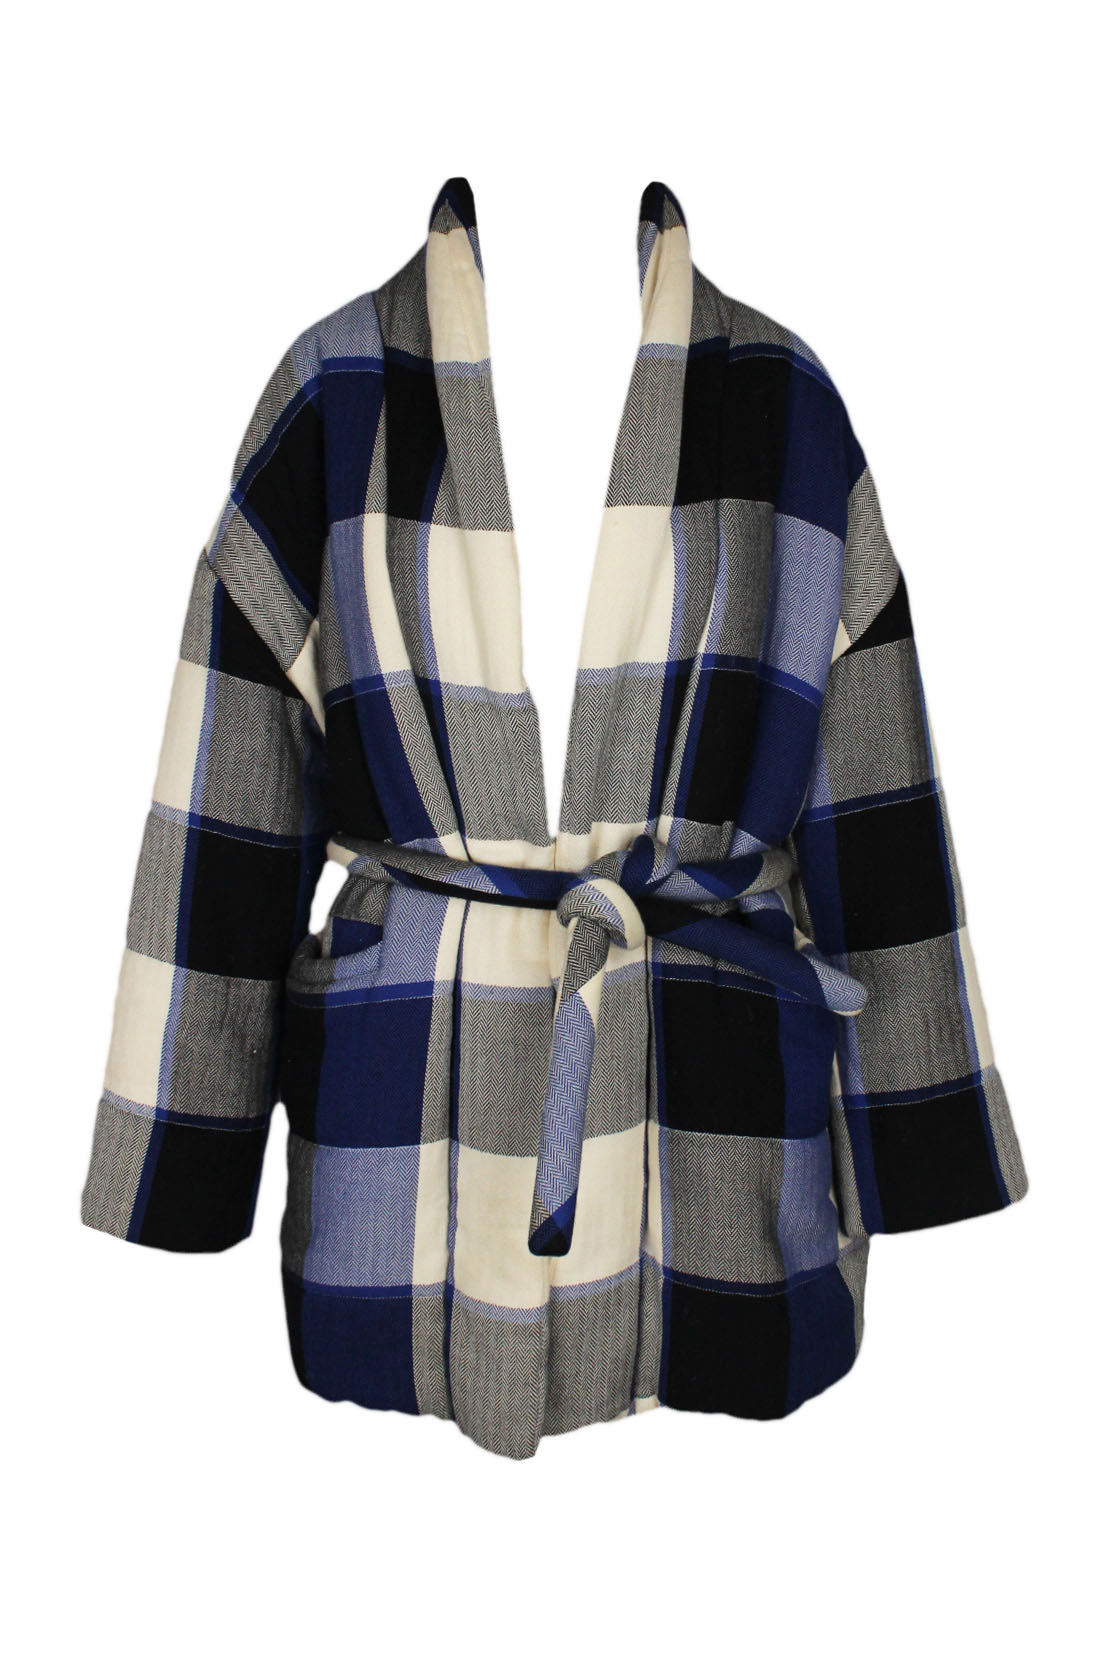 mara hoffman quilted plaid kimono jacket. features two welt pockets and wrap around strap. one internal lined pocket on chest. 